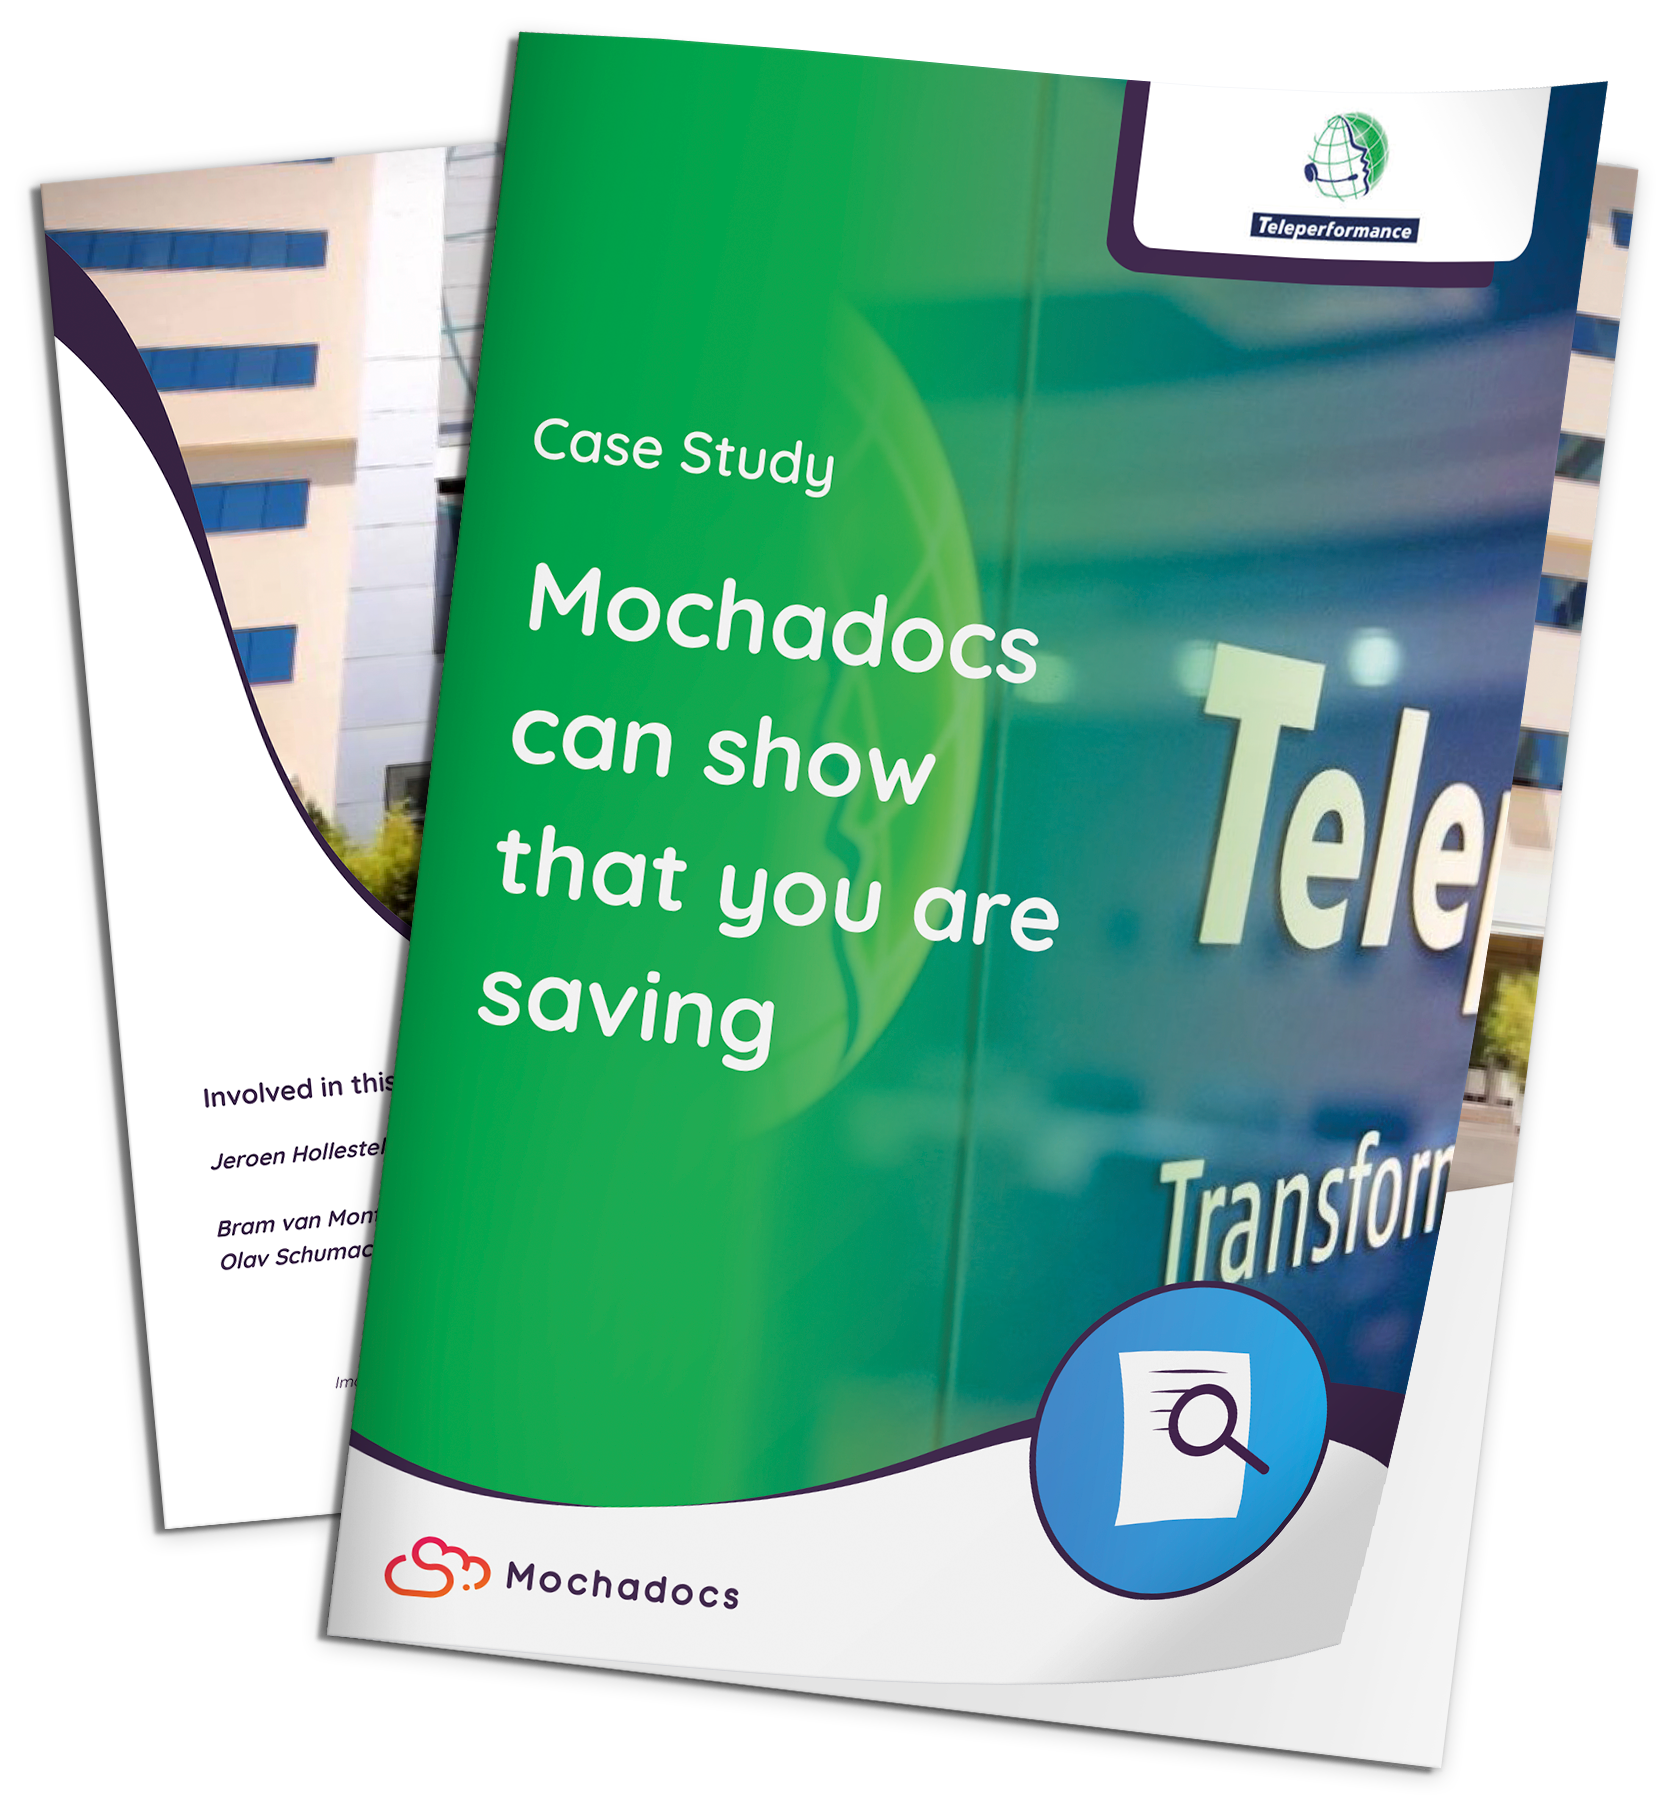 Mochadocs - Contract Management - Case Study - Teleperformance - Mochadocs can show that you are saving